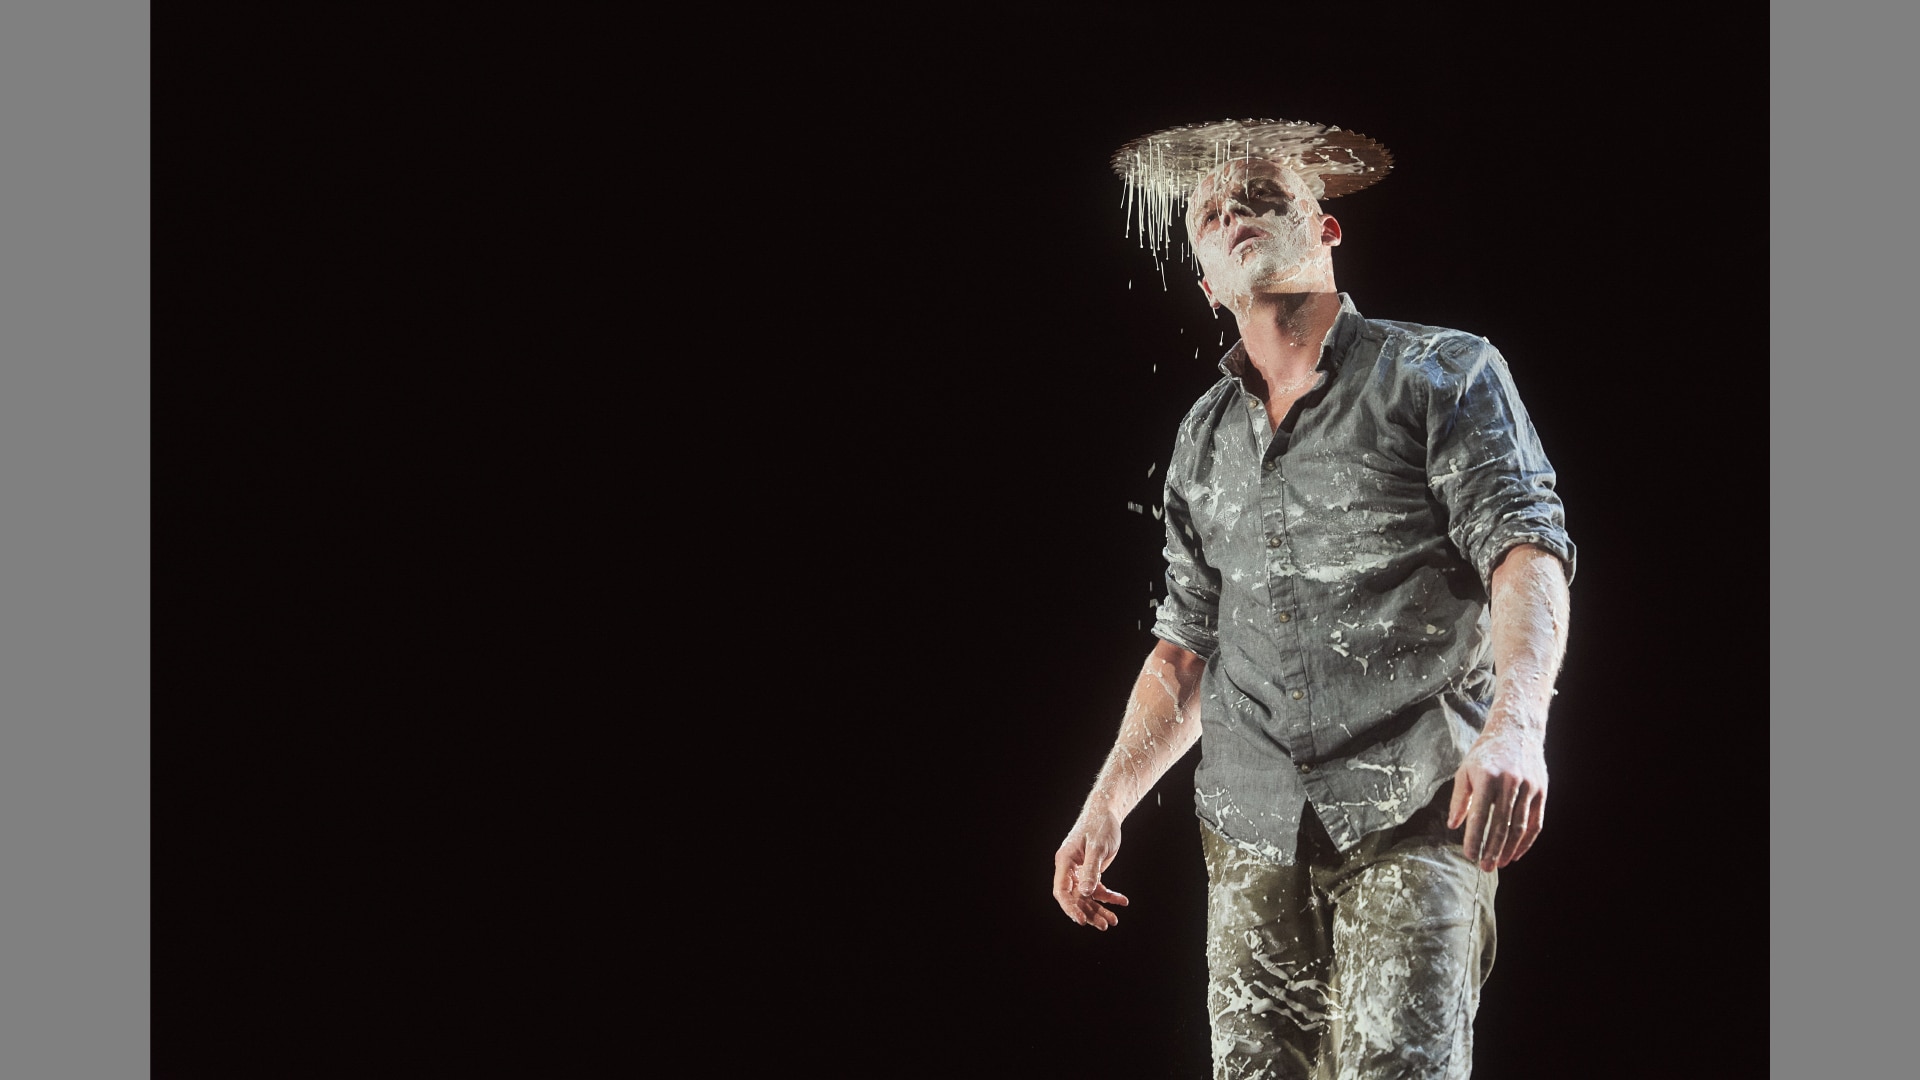 A performer balances a circular saw blade on his head. He's covered in white glue